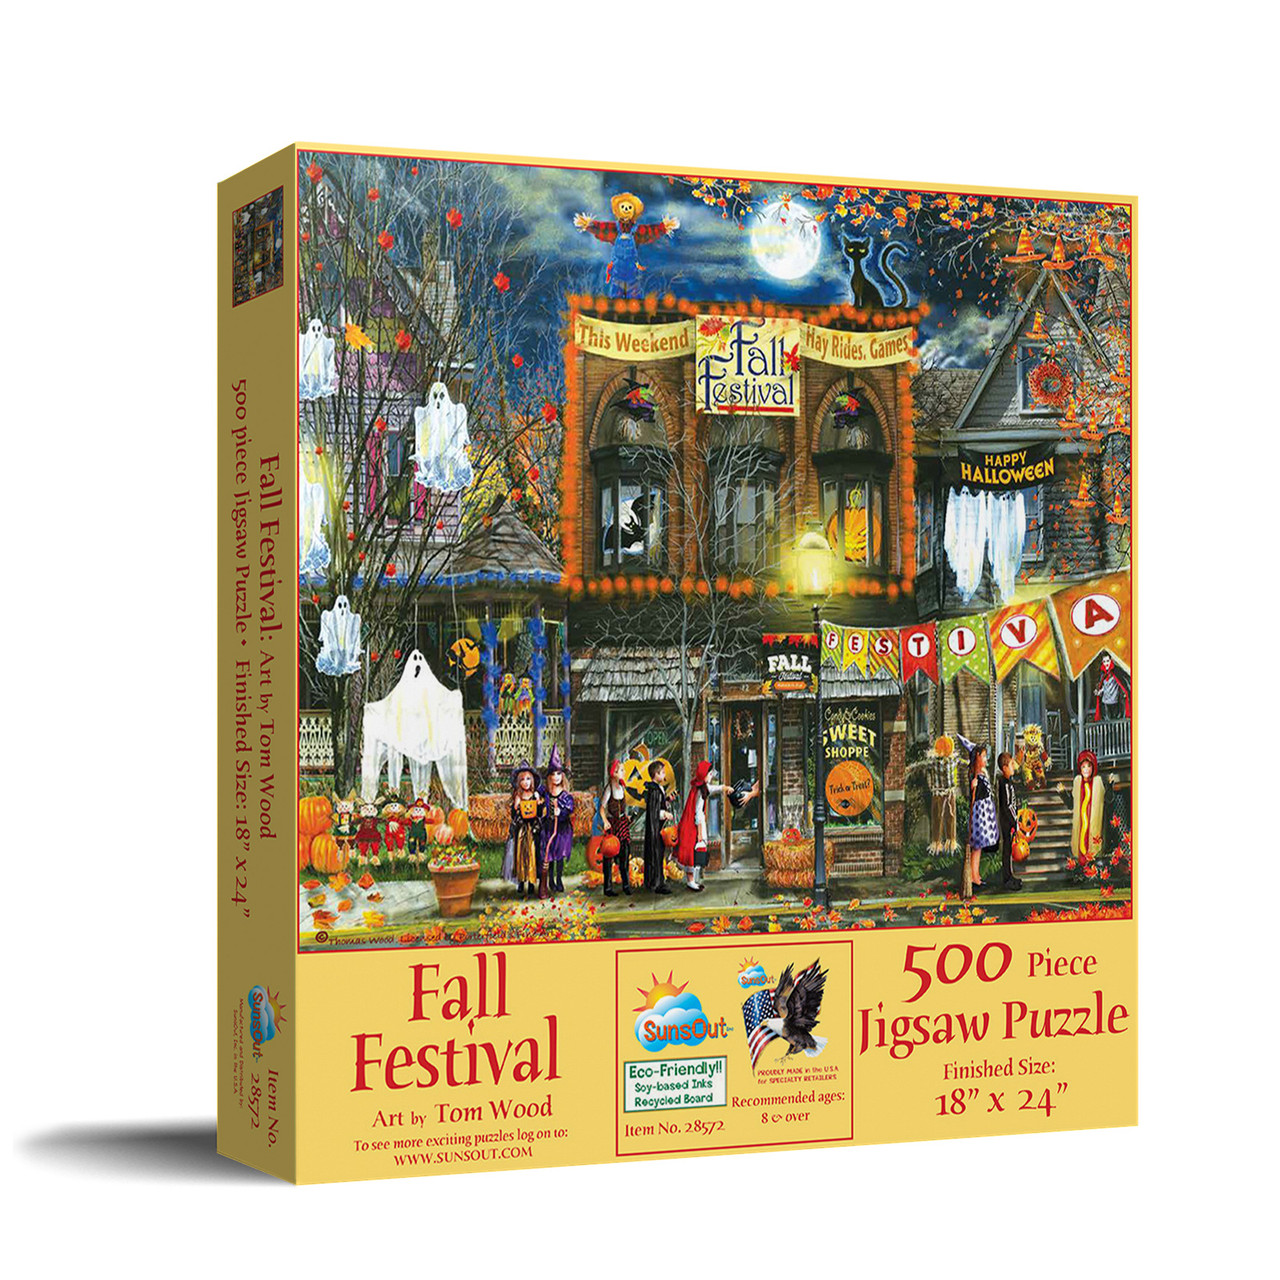 at The End of The Day 500 pc Jigsaw Puzzle by SUNSOUT